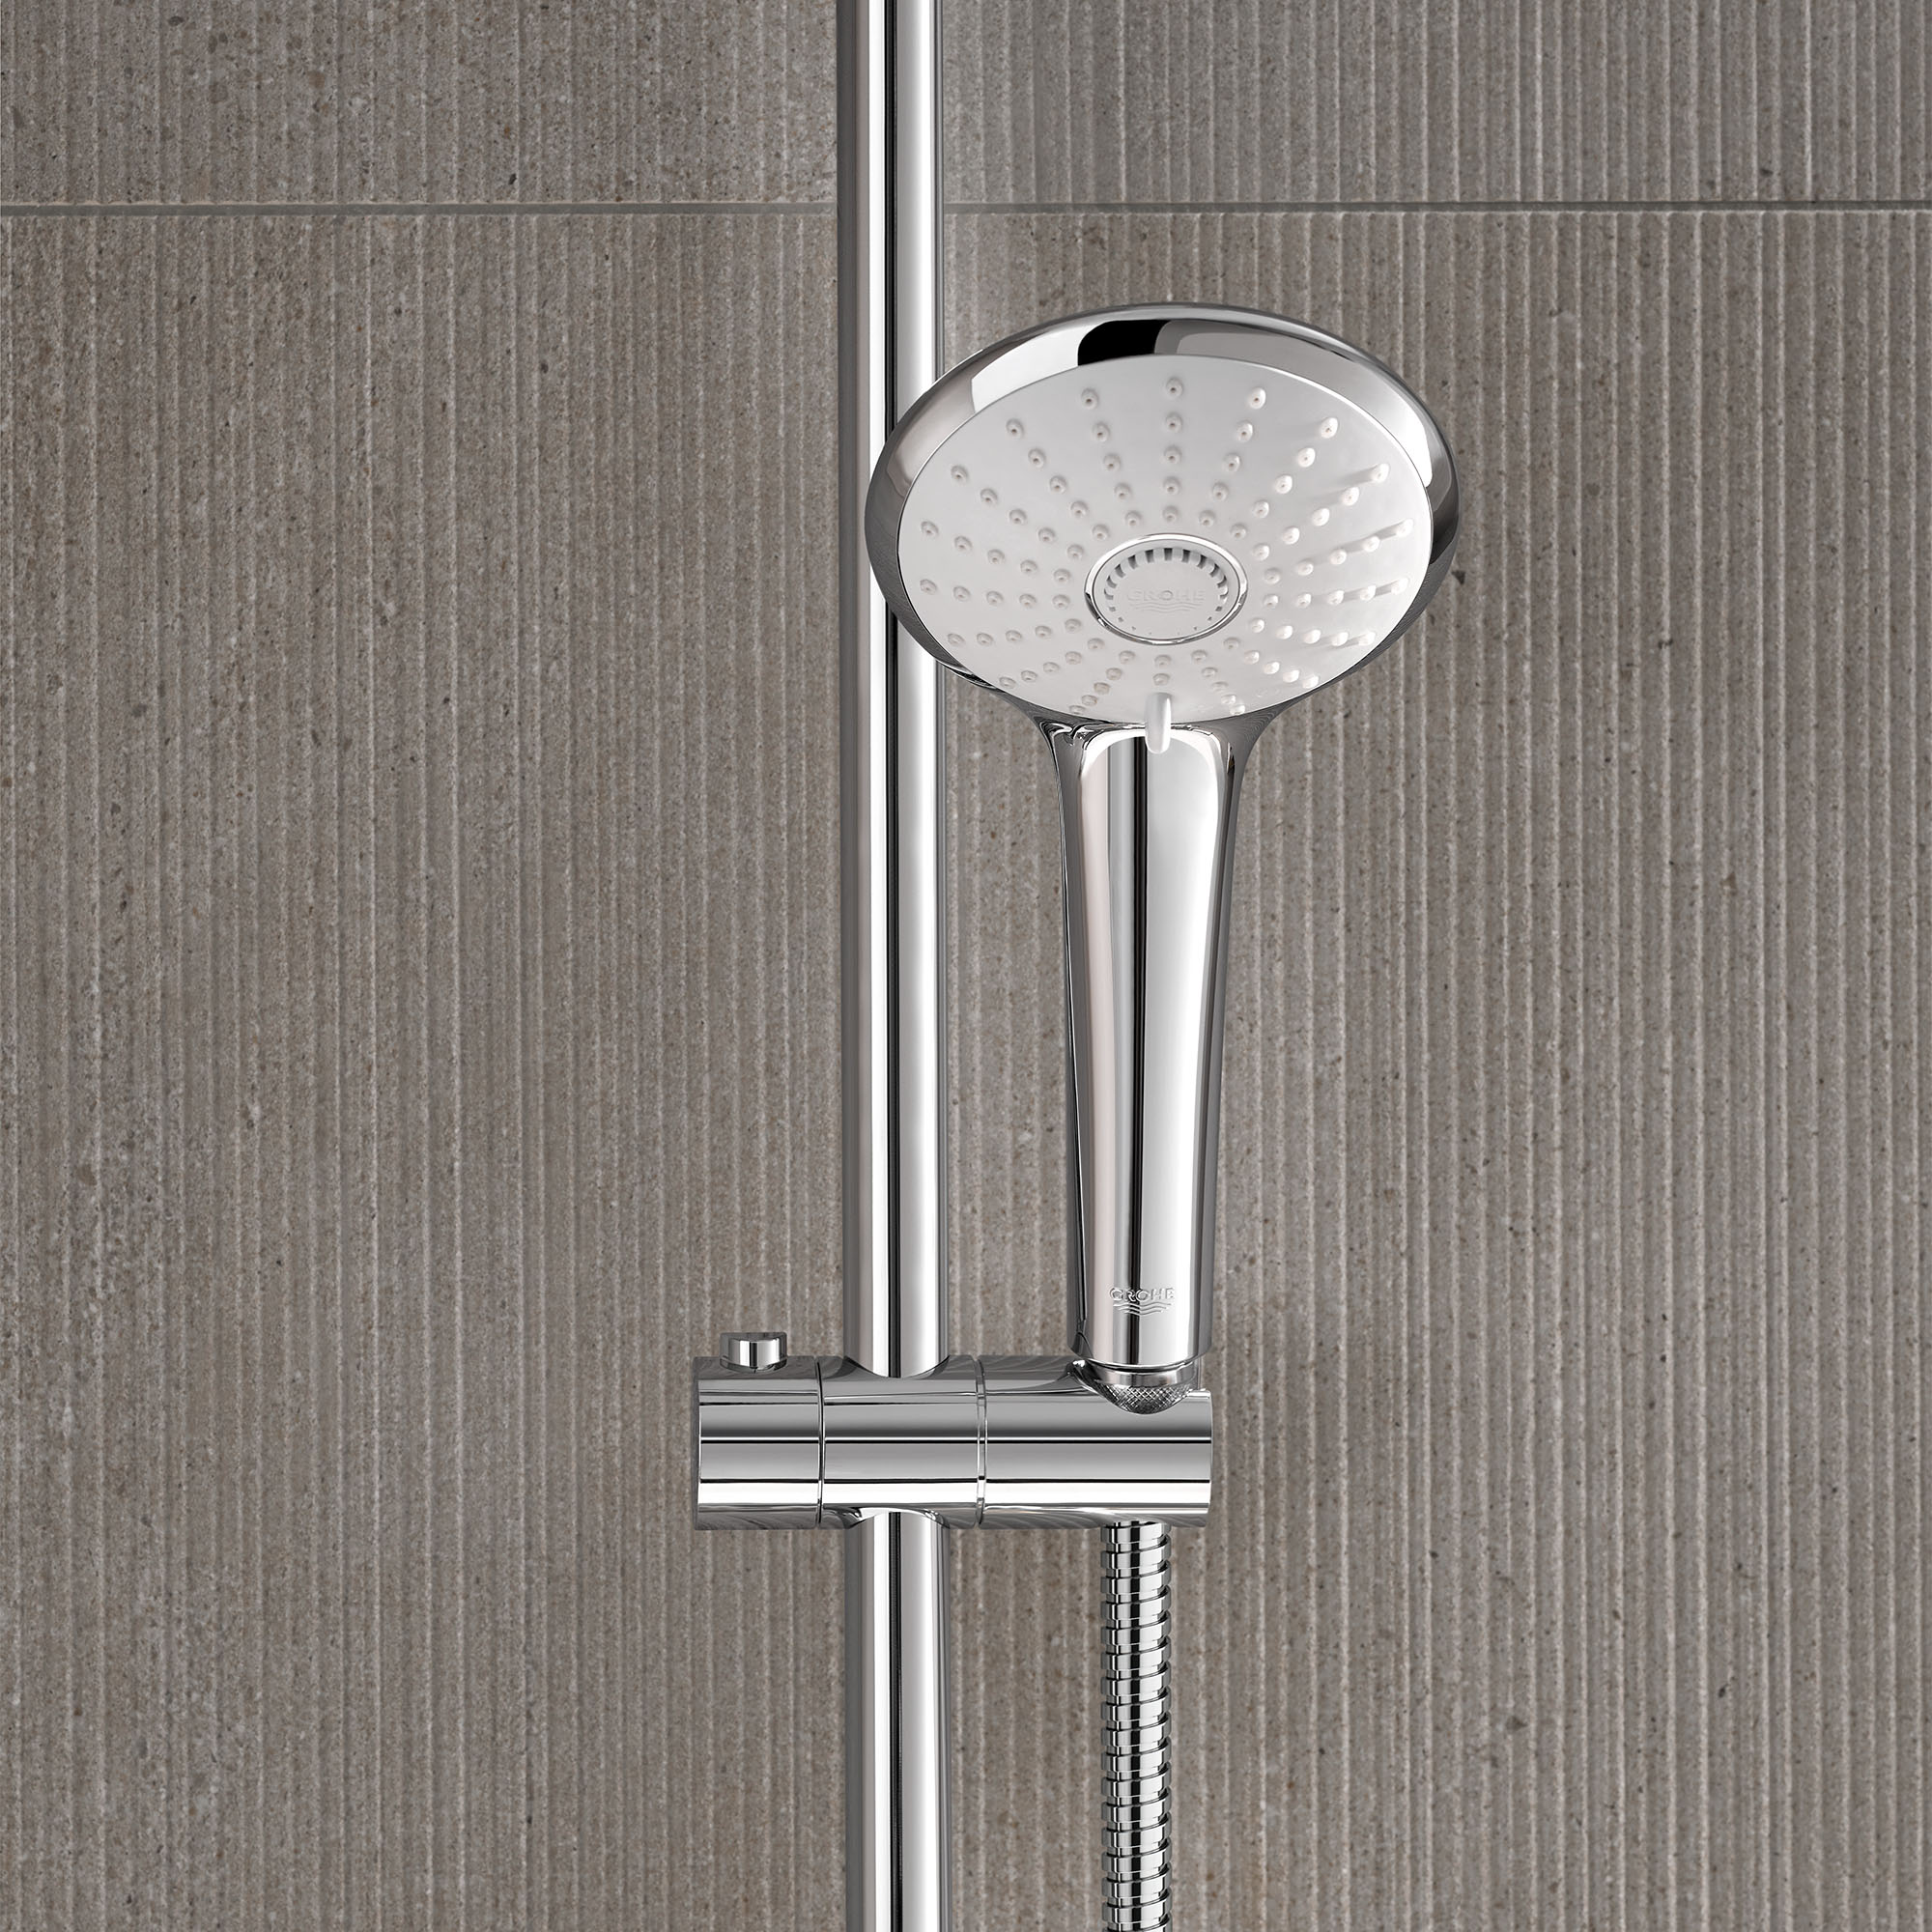 310 CoolTouch Thermostatic Shower System, 1.75gpm